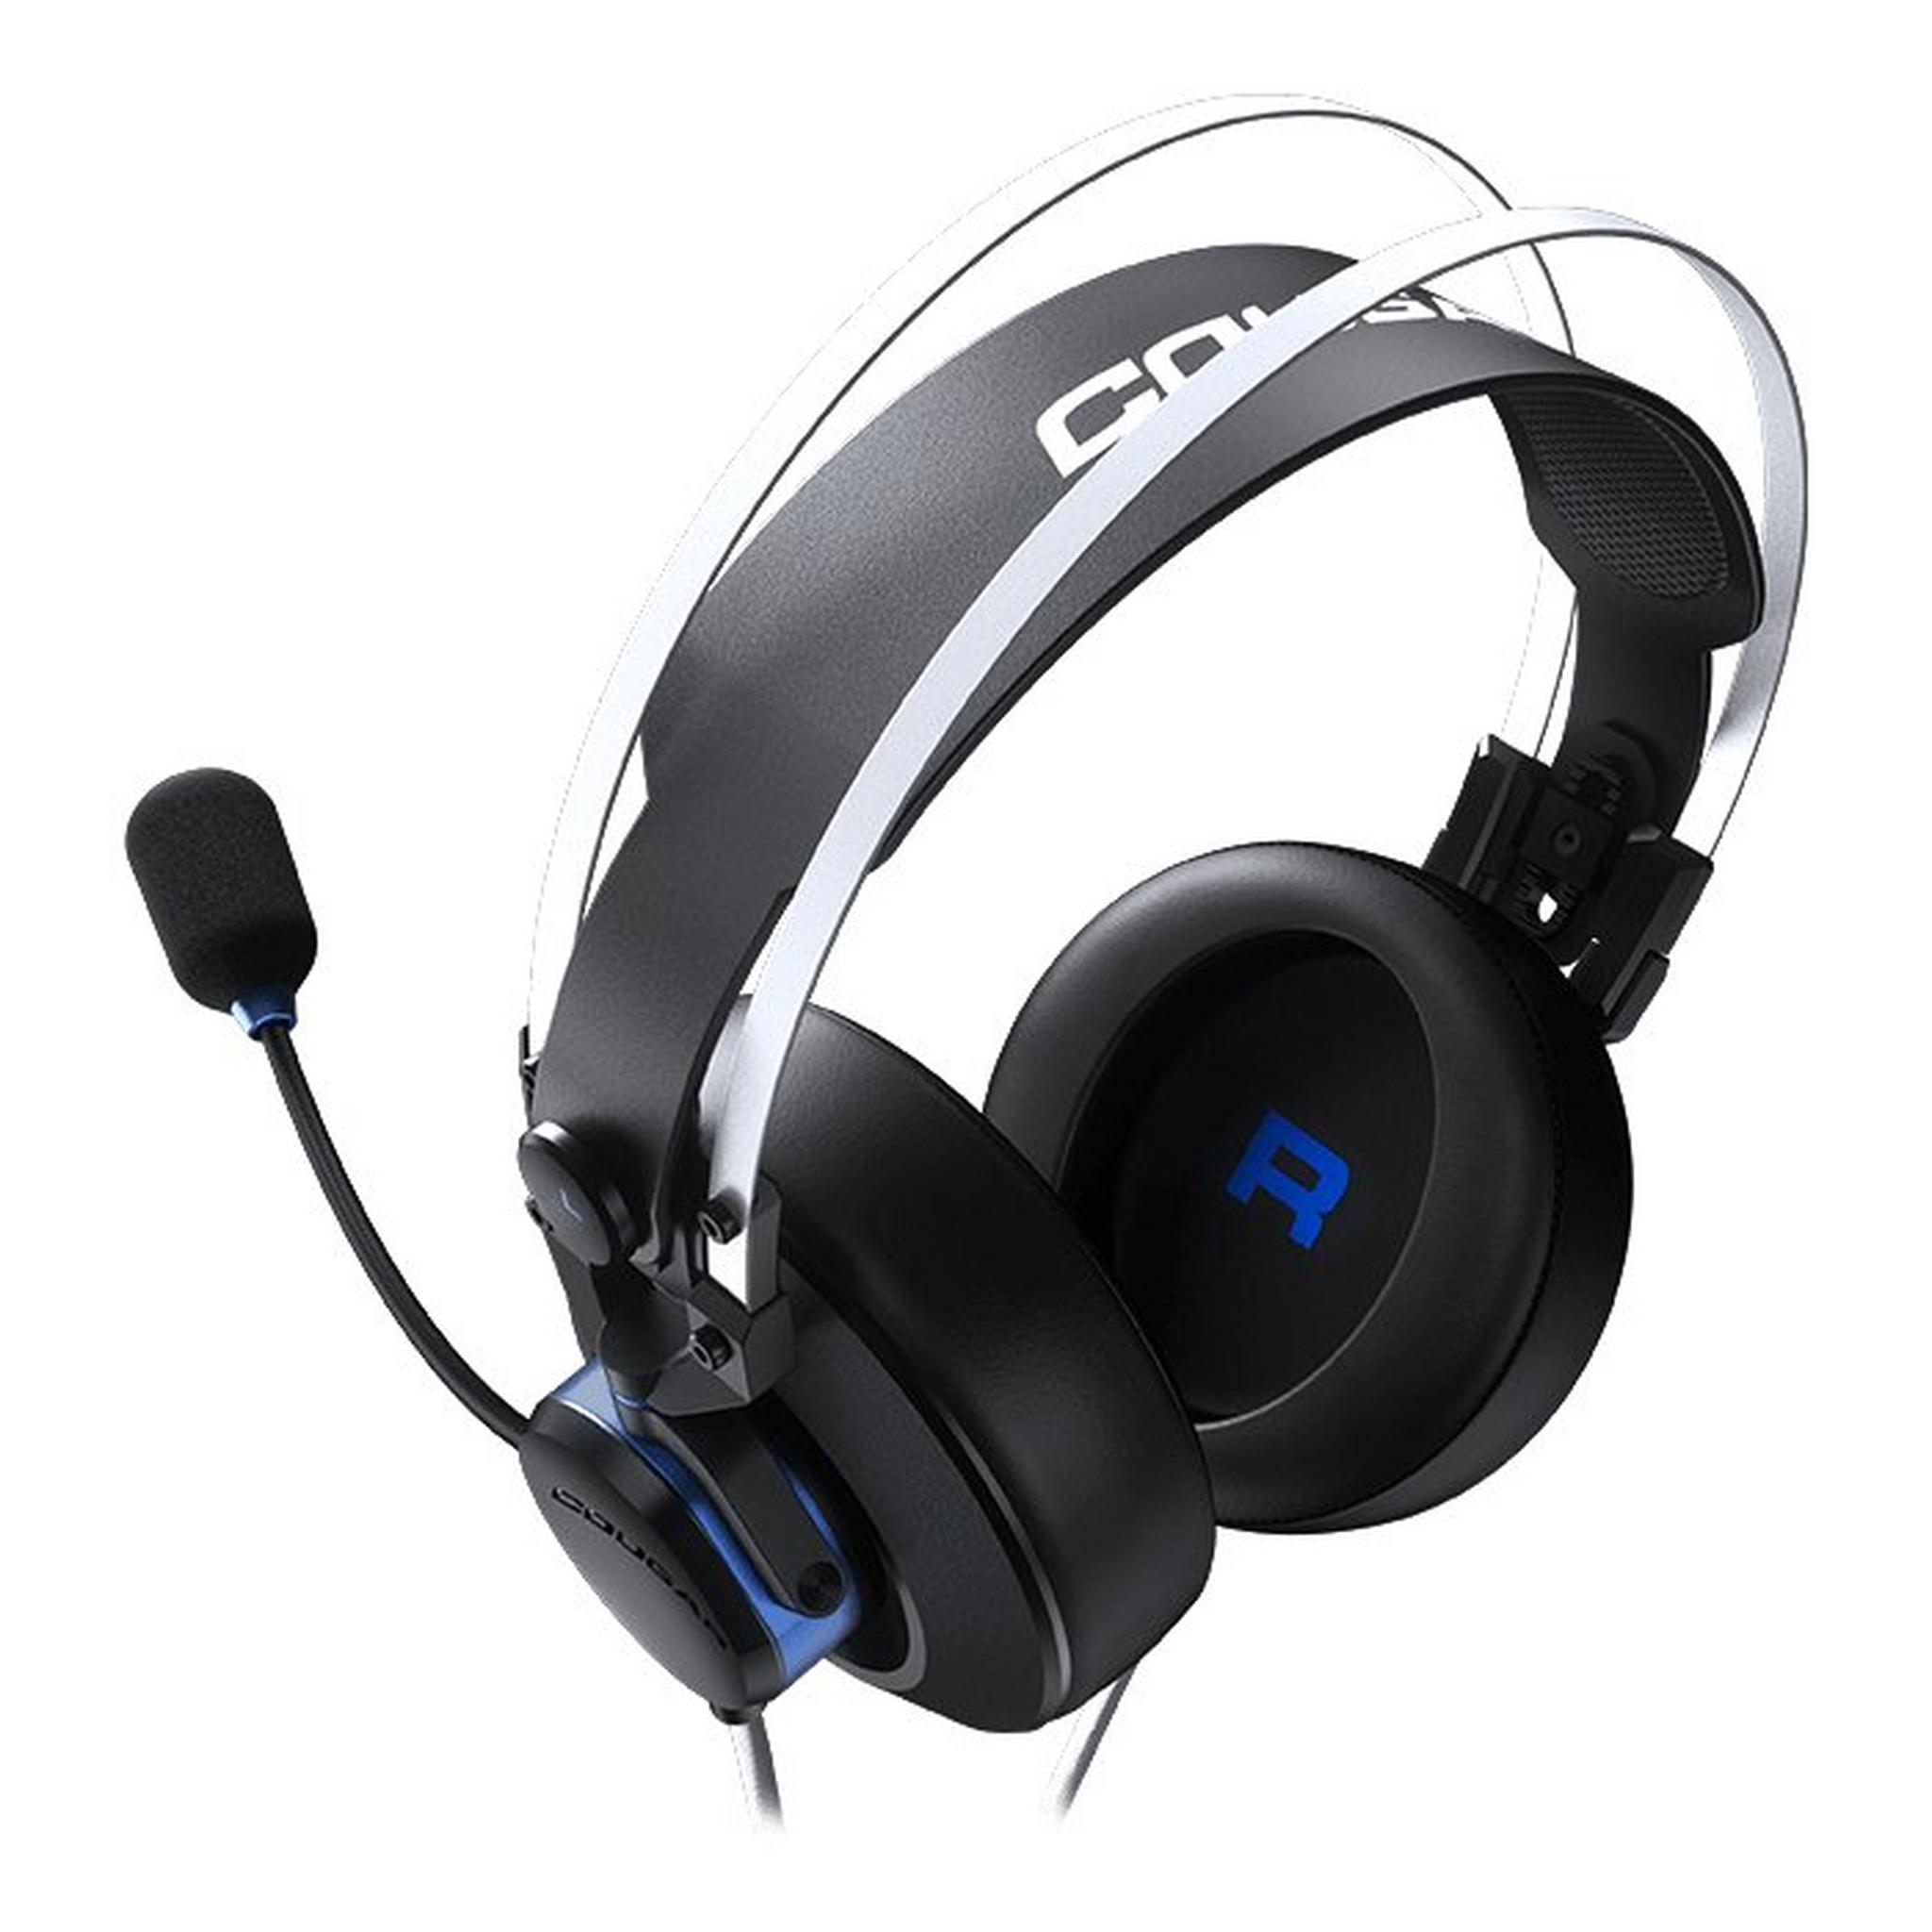 Cougar VM410 Wired Gaming Headset for PlayStation, 3H550P53S.000 - Blue